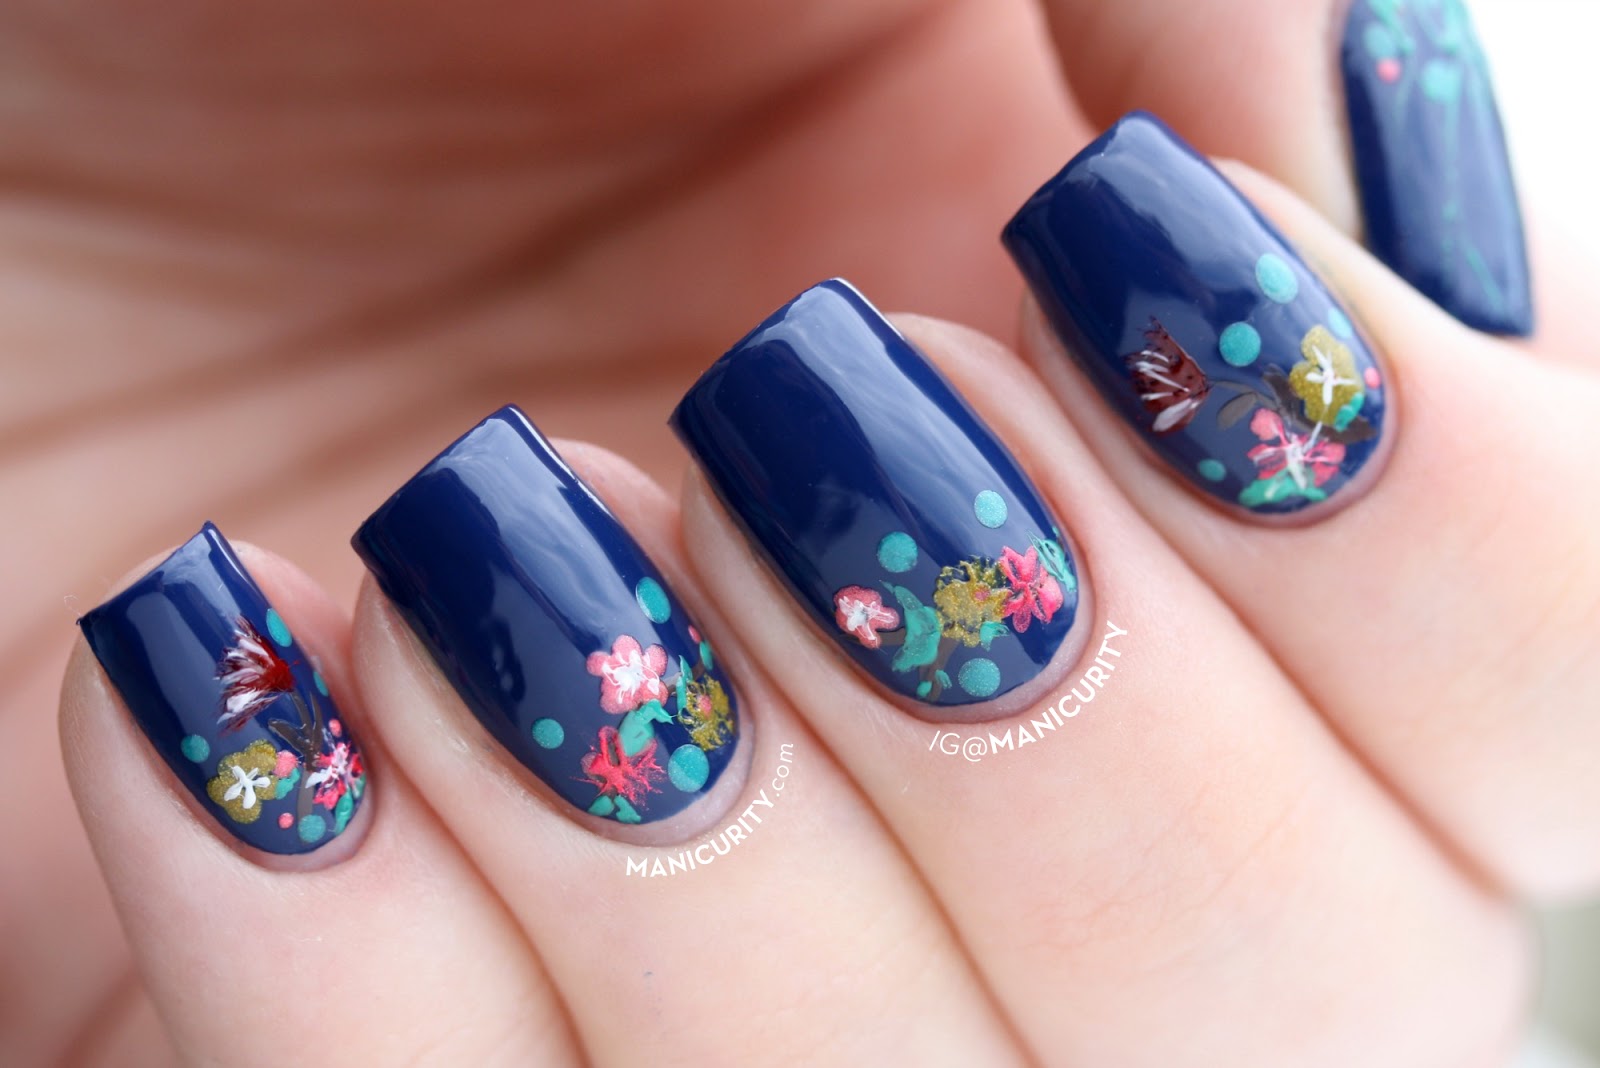 15 Half Moon Nail Designs To Draw Inspiration From - fashionsy.com